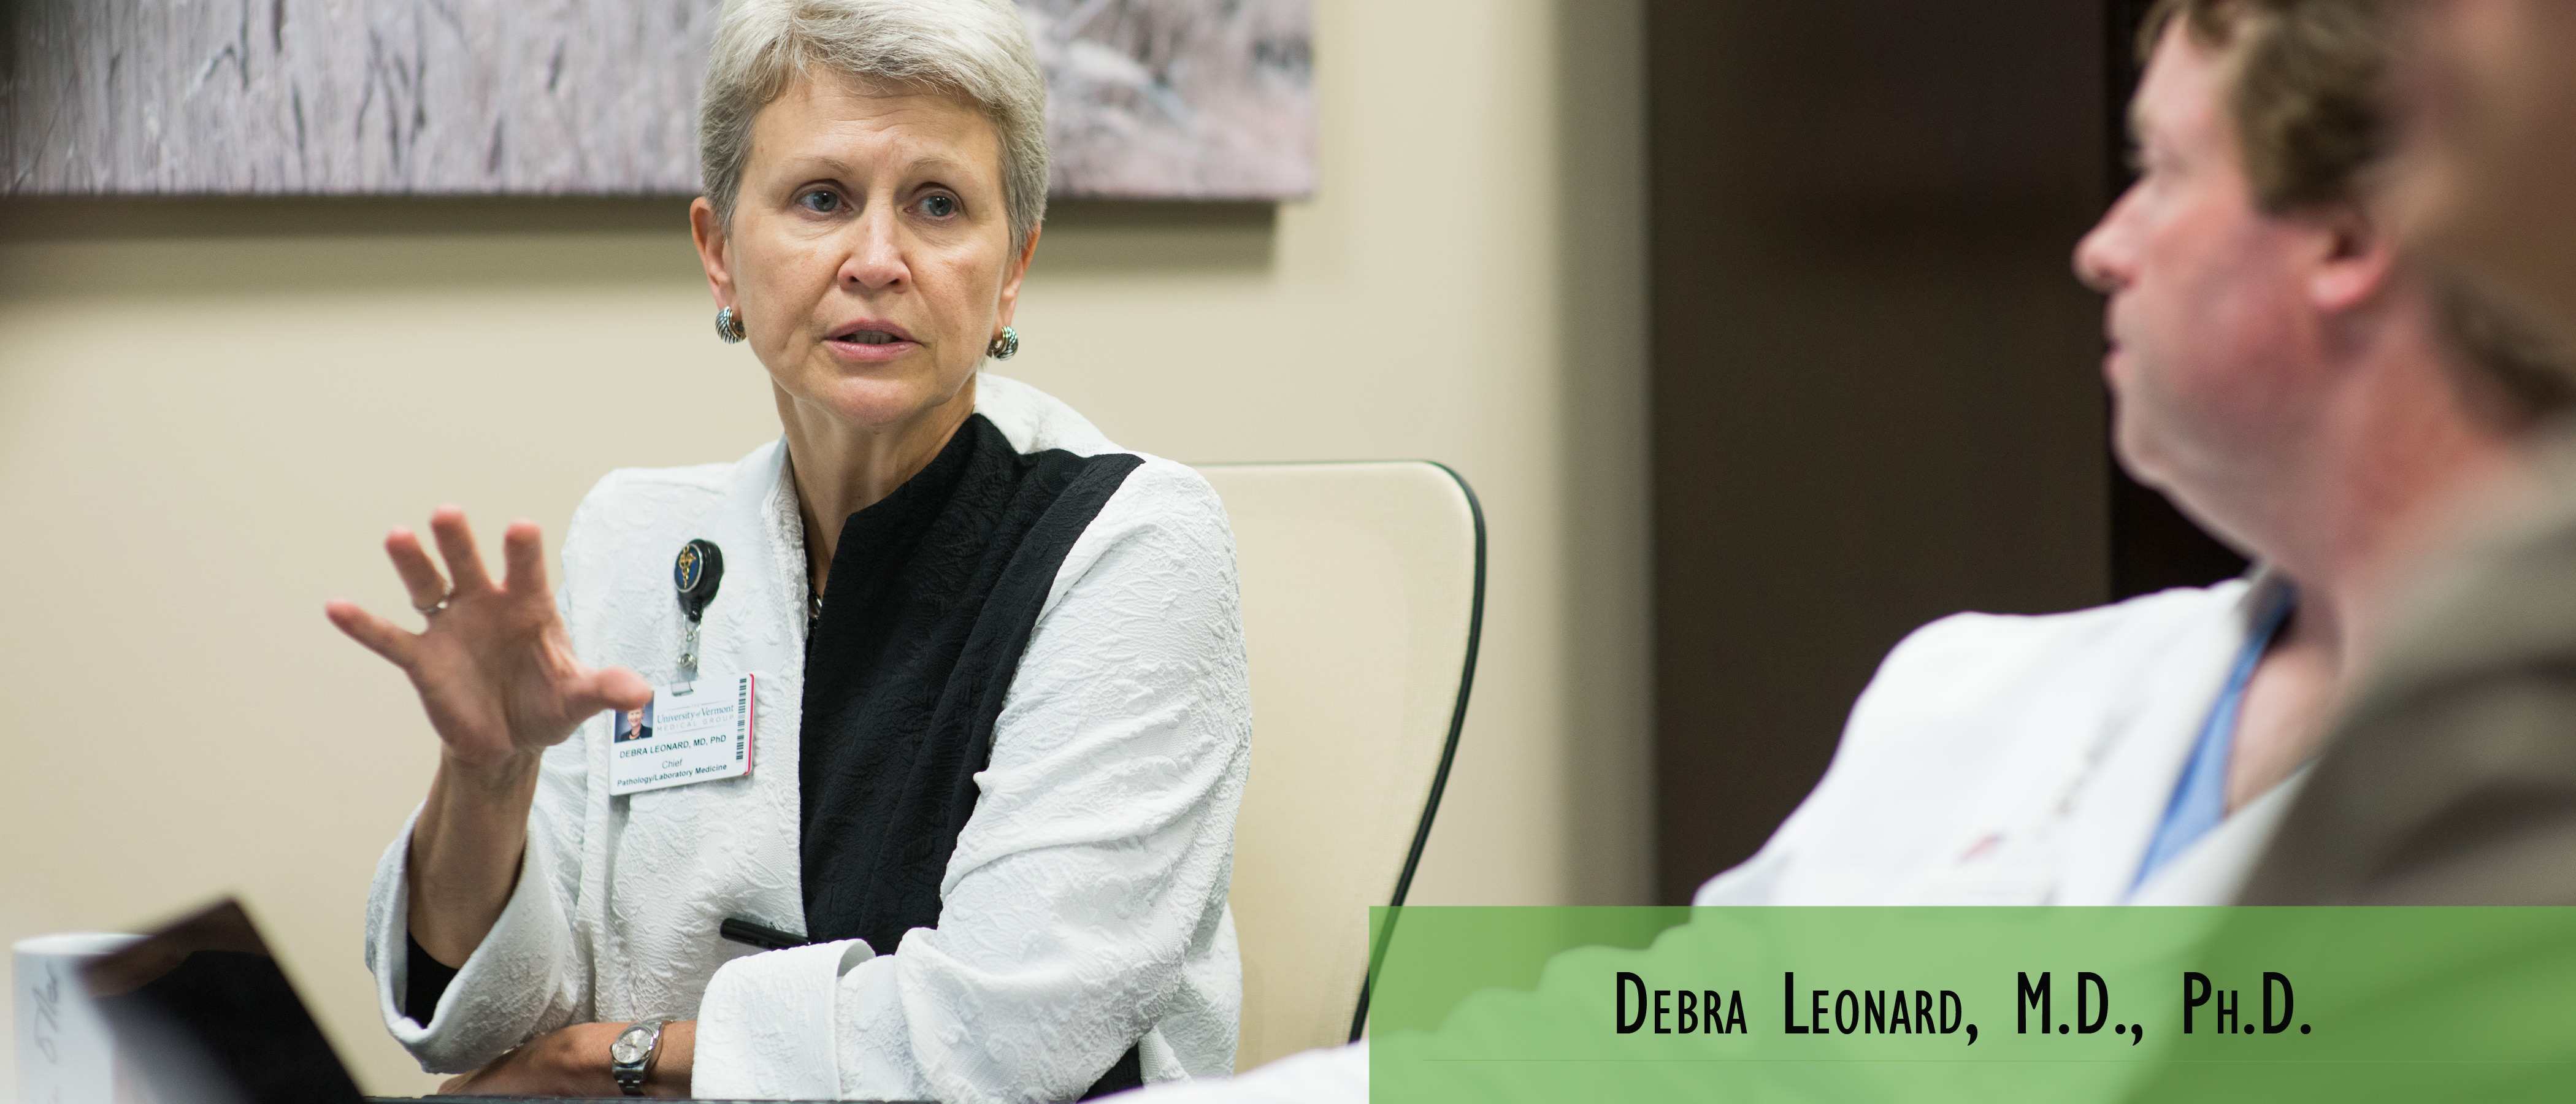 Debra Leonard, M.D., Ph.D., conducts a meeting with colleagues.